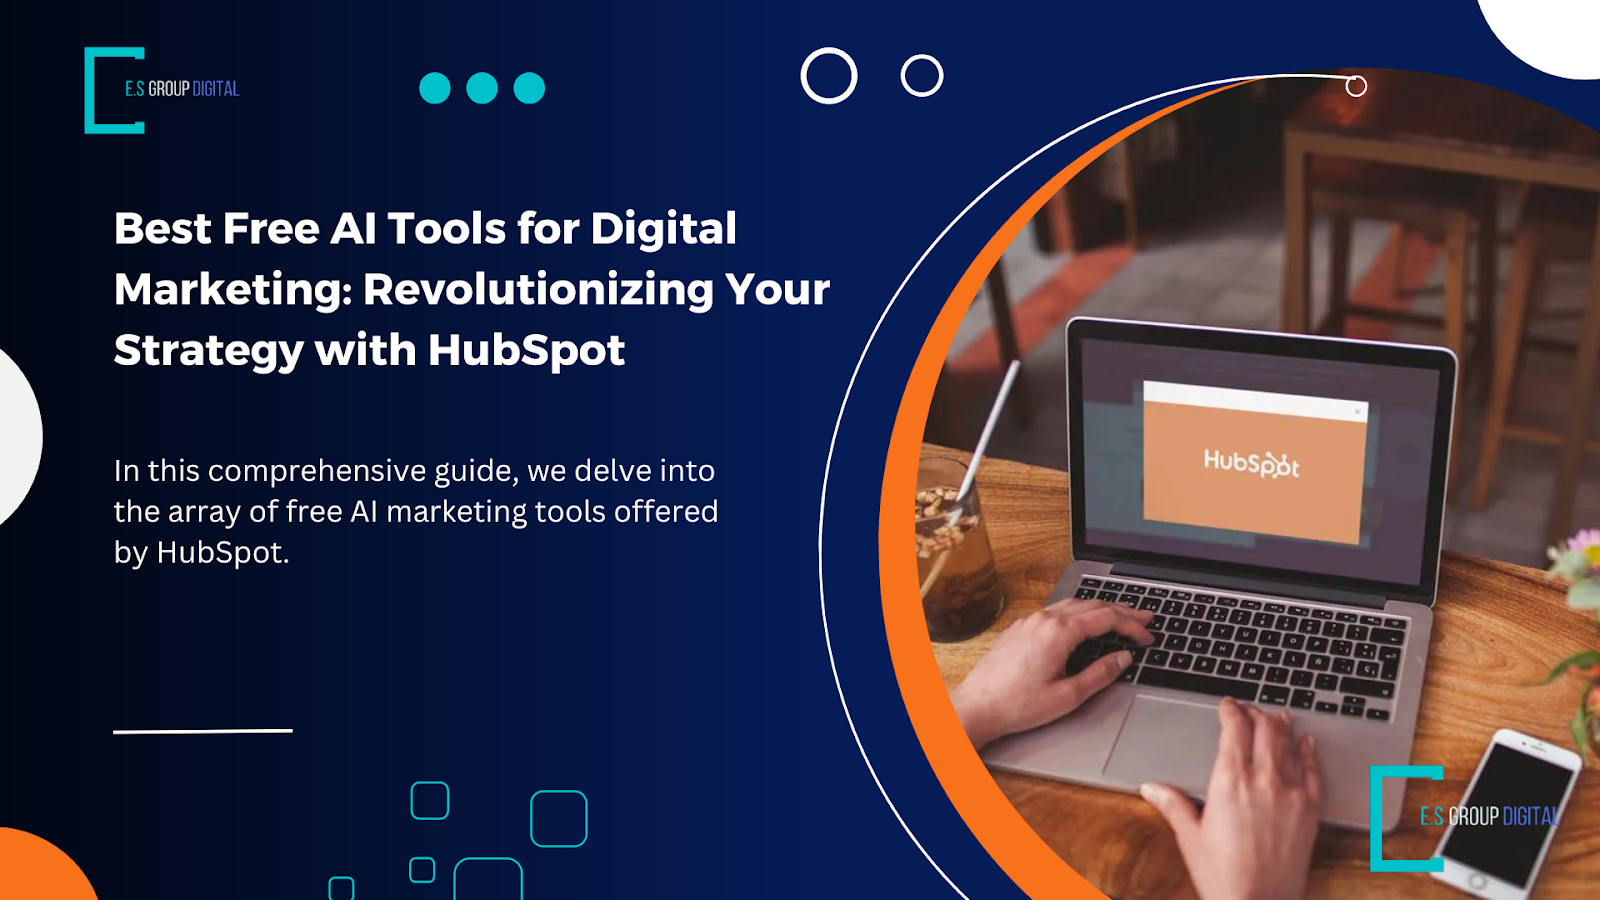 Best Free AI Tools for Digital Marketing: Revolutionizing Your Strategy with HubSpot